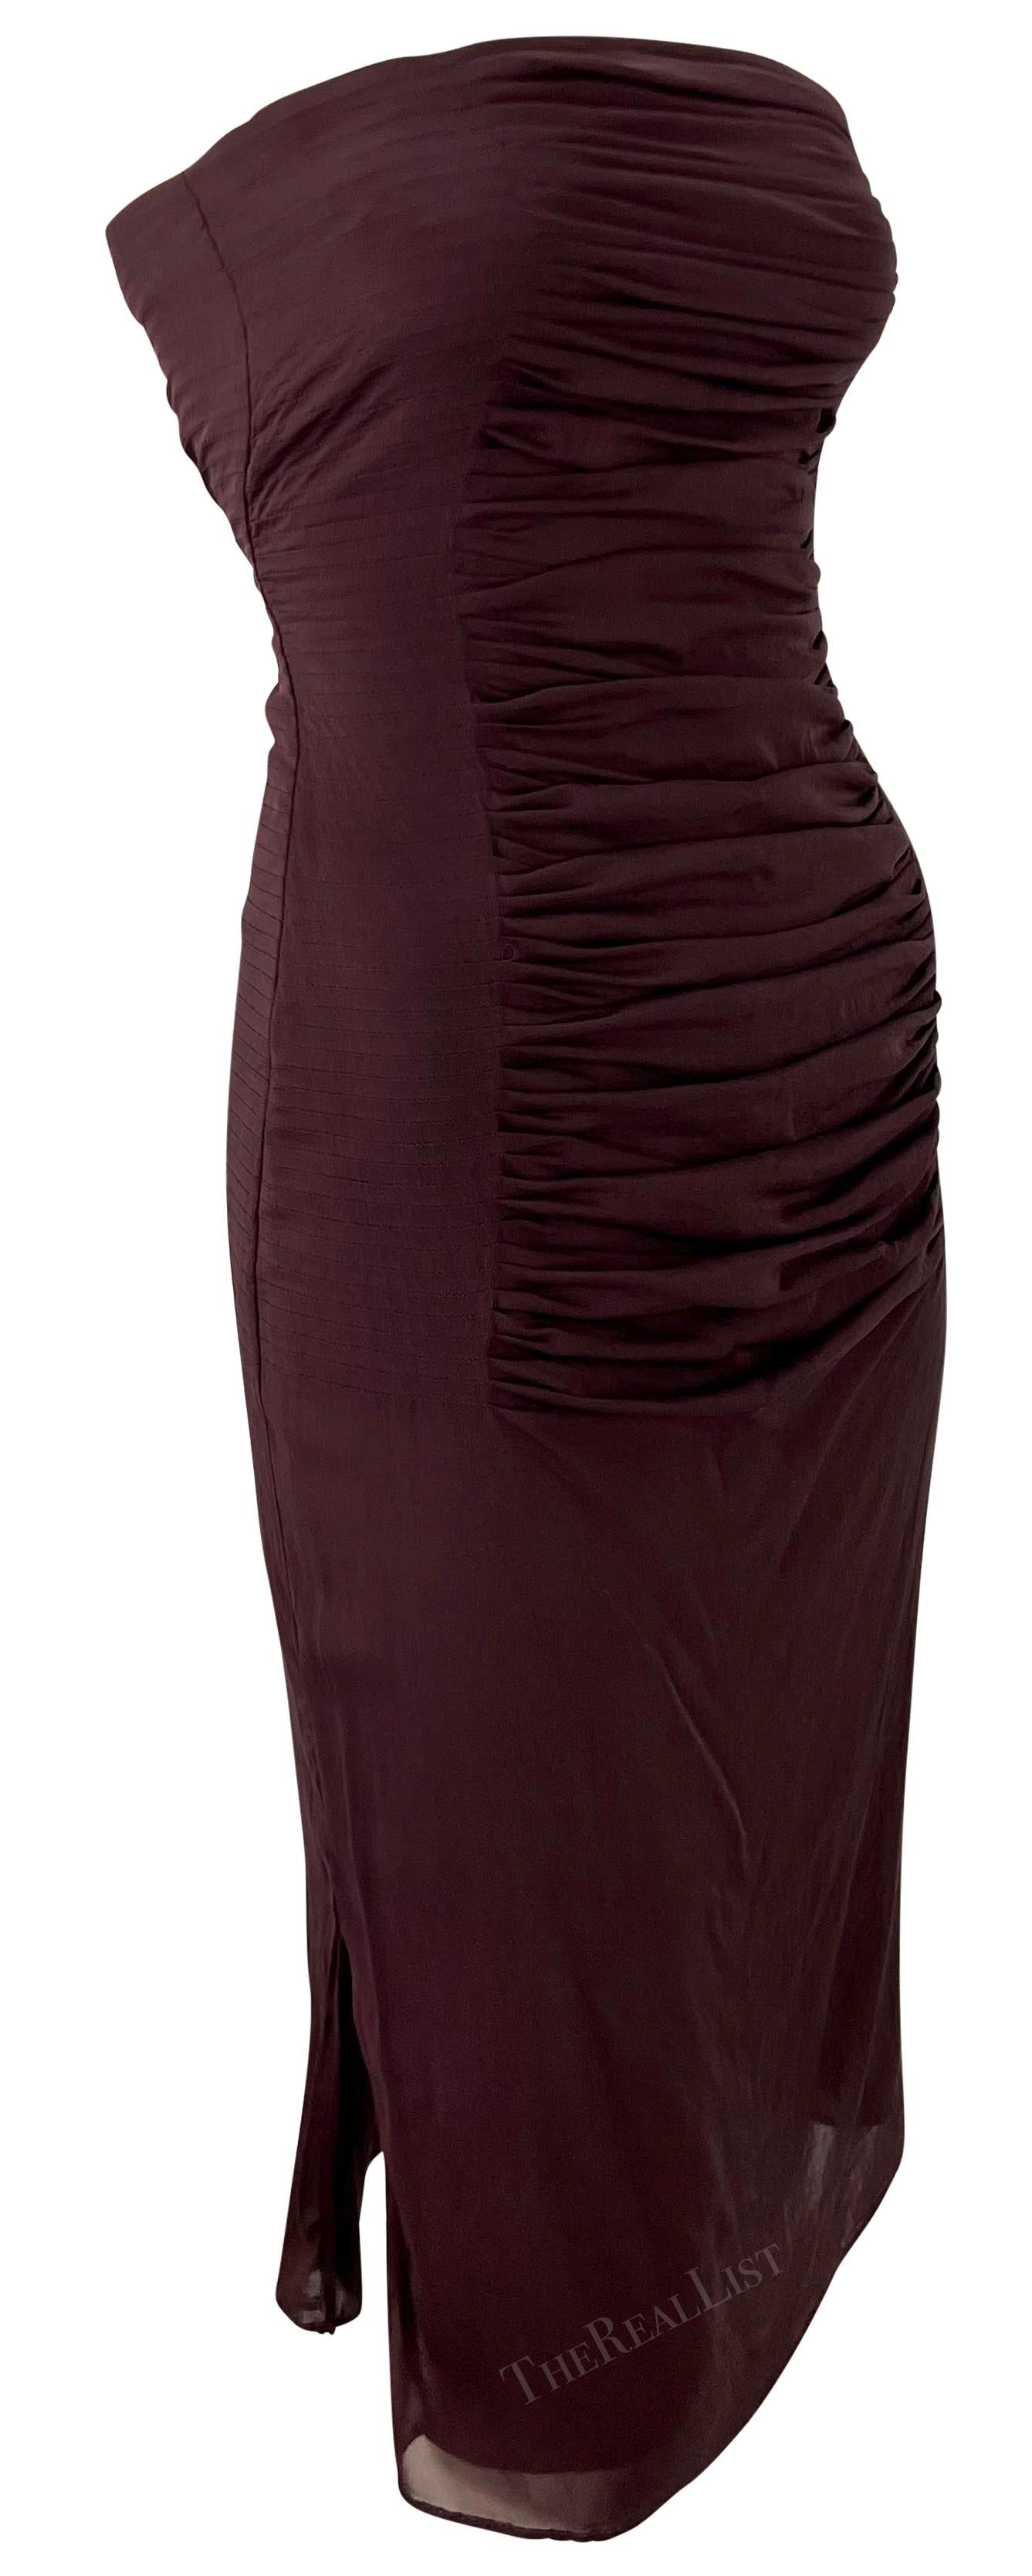 S/S 2001 Yves Saint Laurent by Tom Ford Sheer Maroon Pleat Strapless Mini Dress For Sale 3